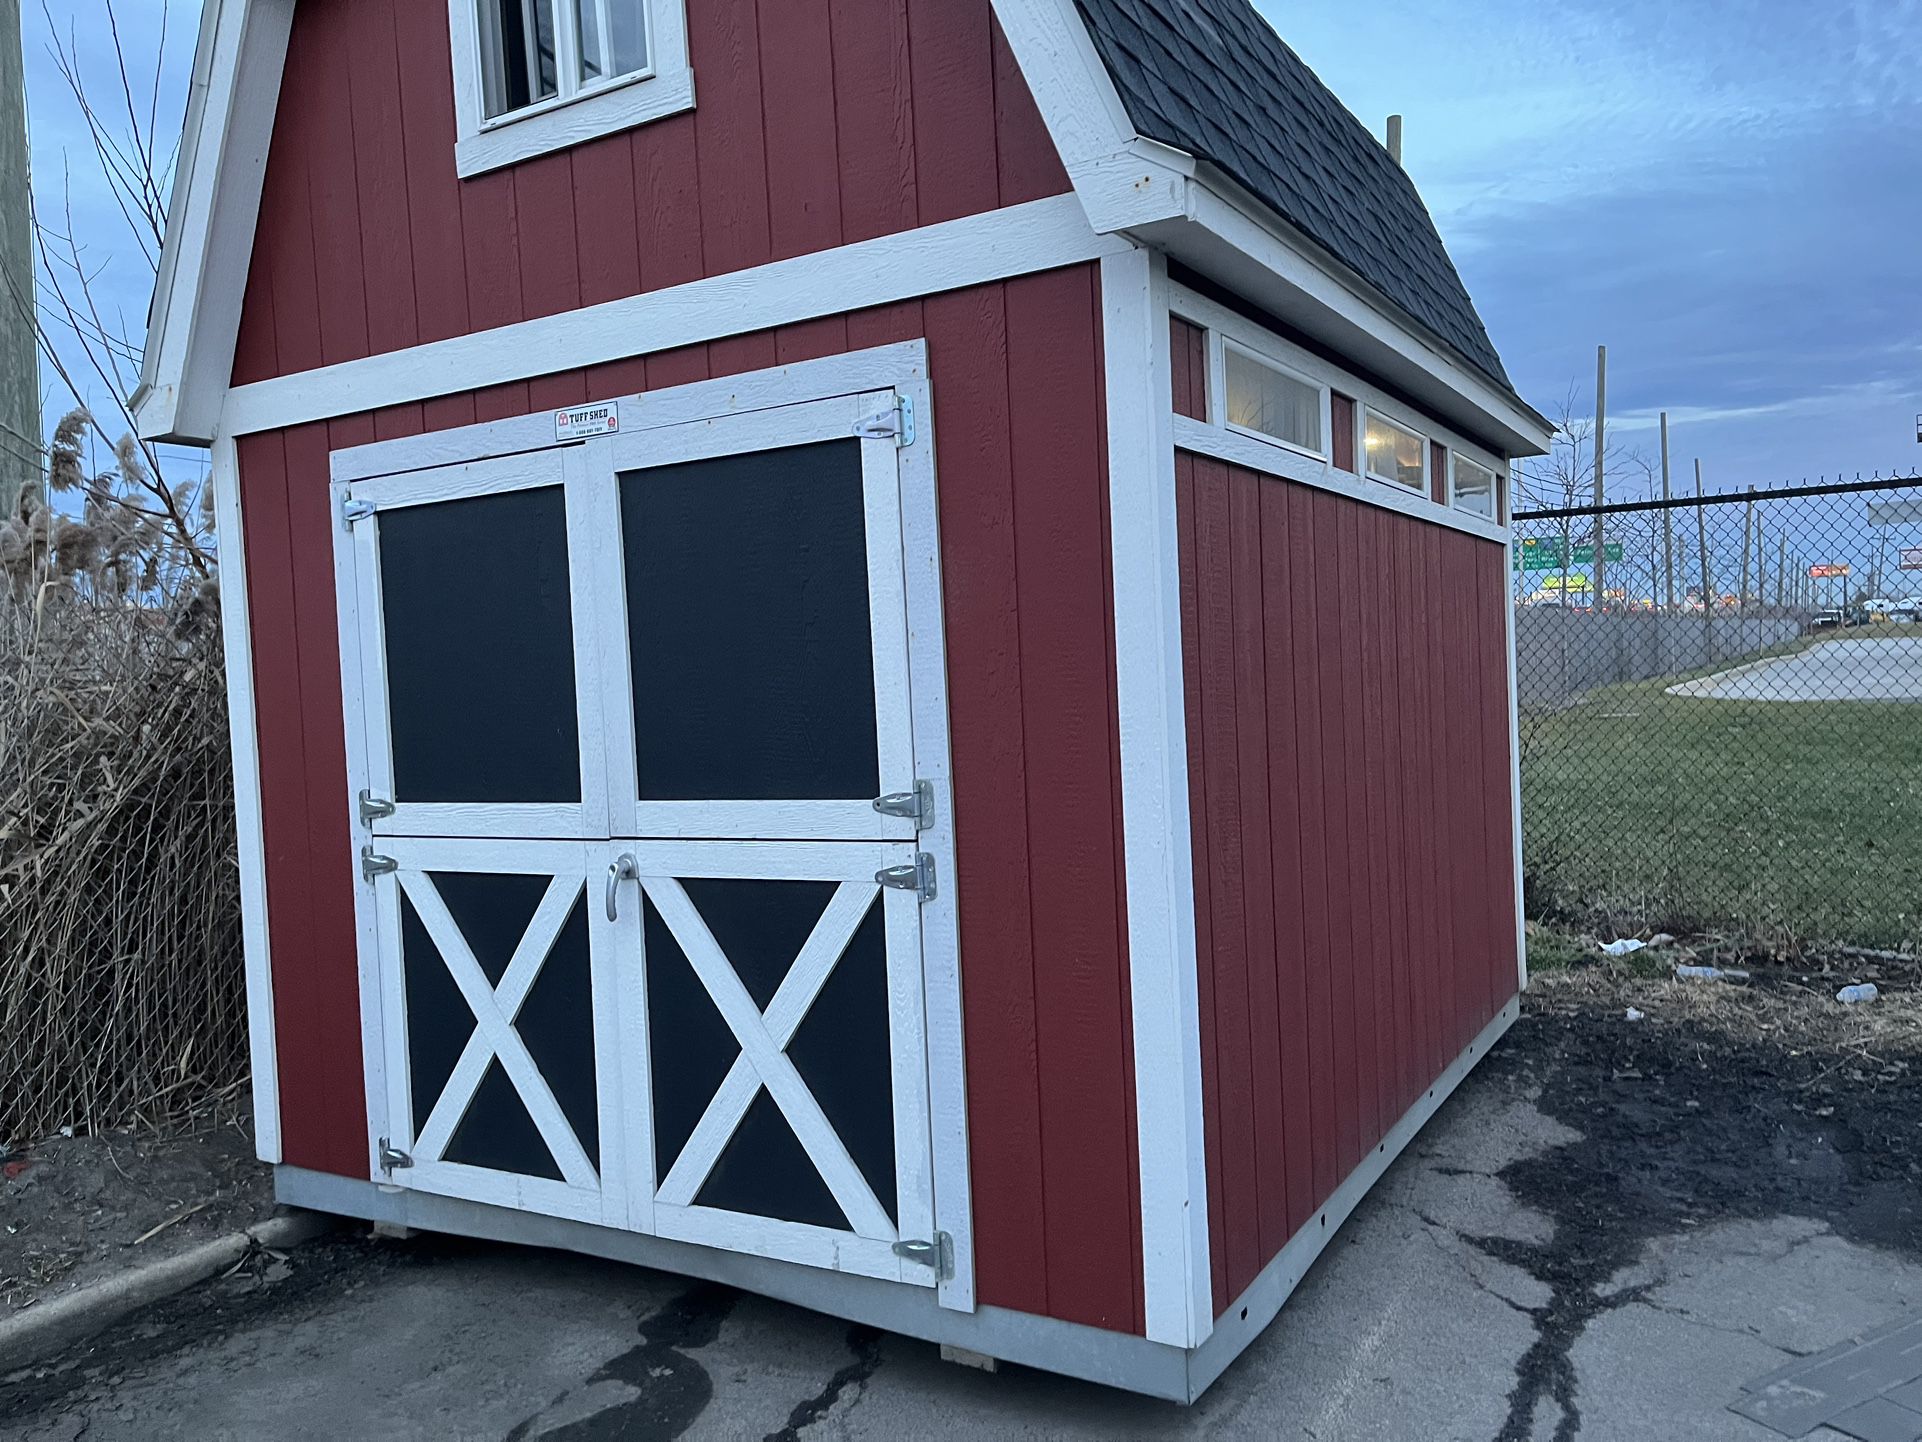 Sheds From Tuff Shed… All Custom Built